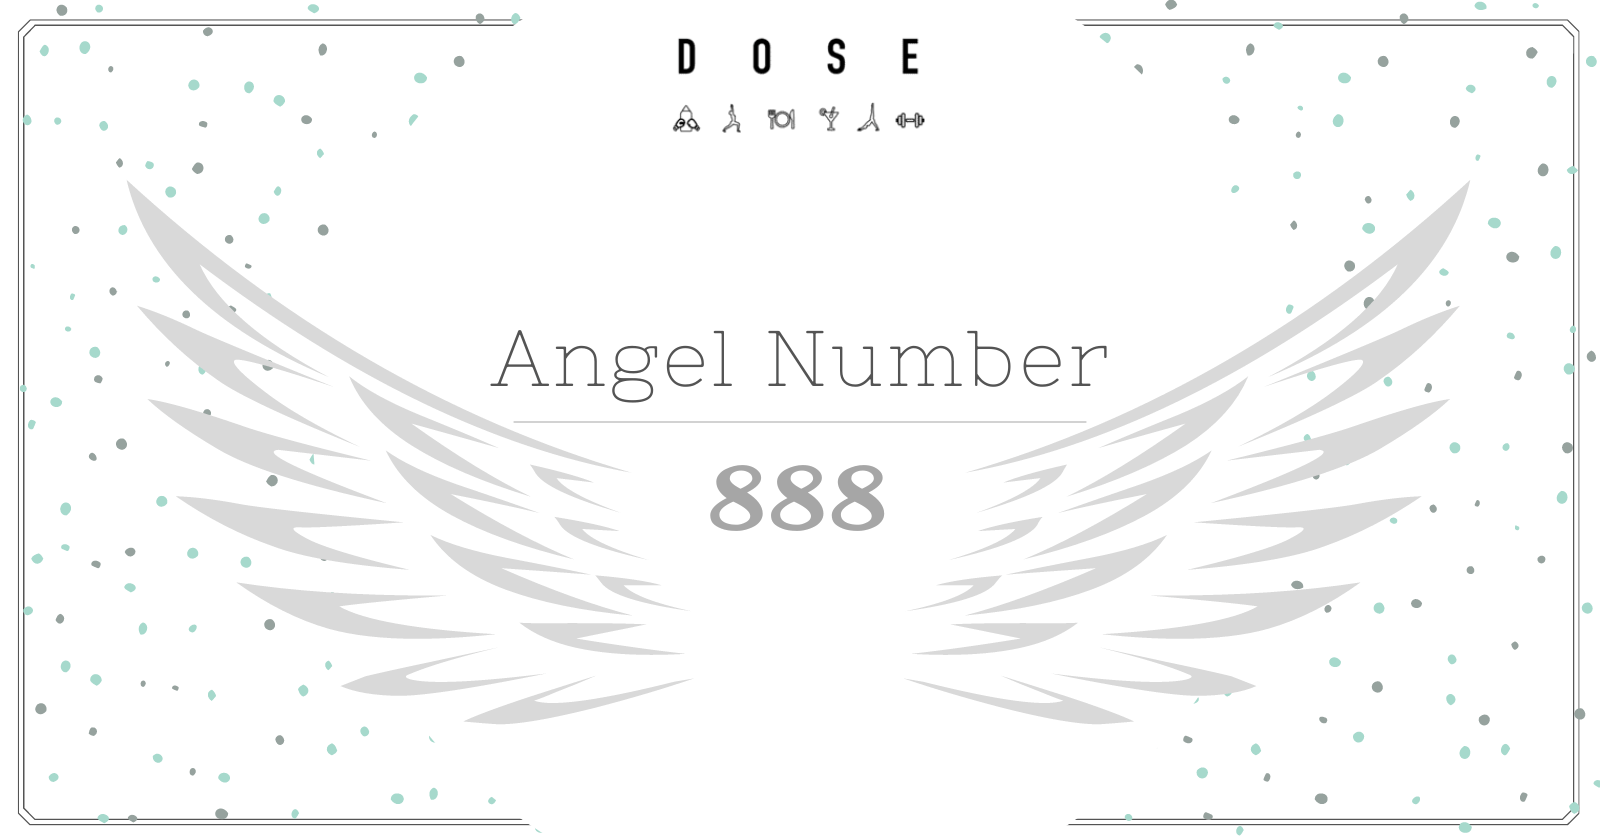 Angel Number 8: Unlimited Abundance is Flowing to You Now